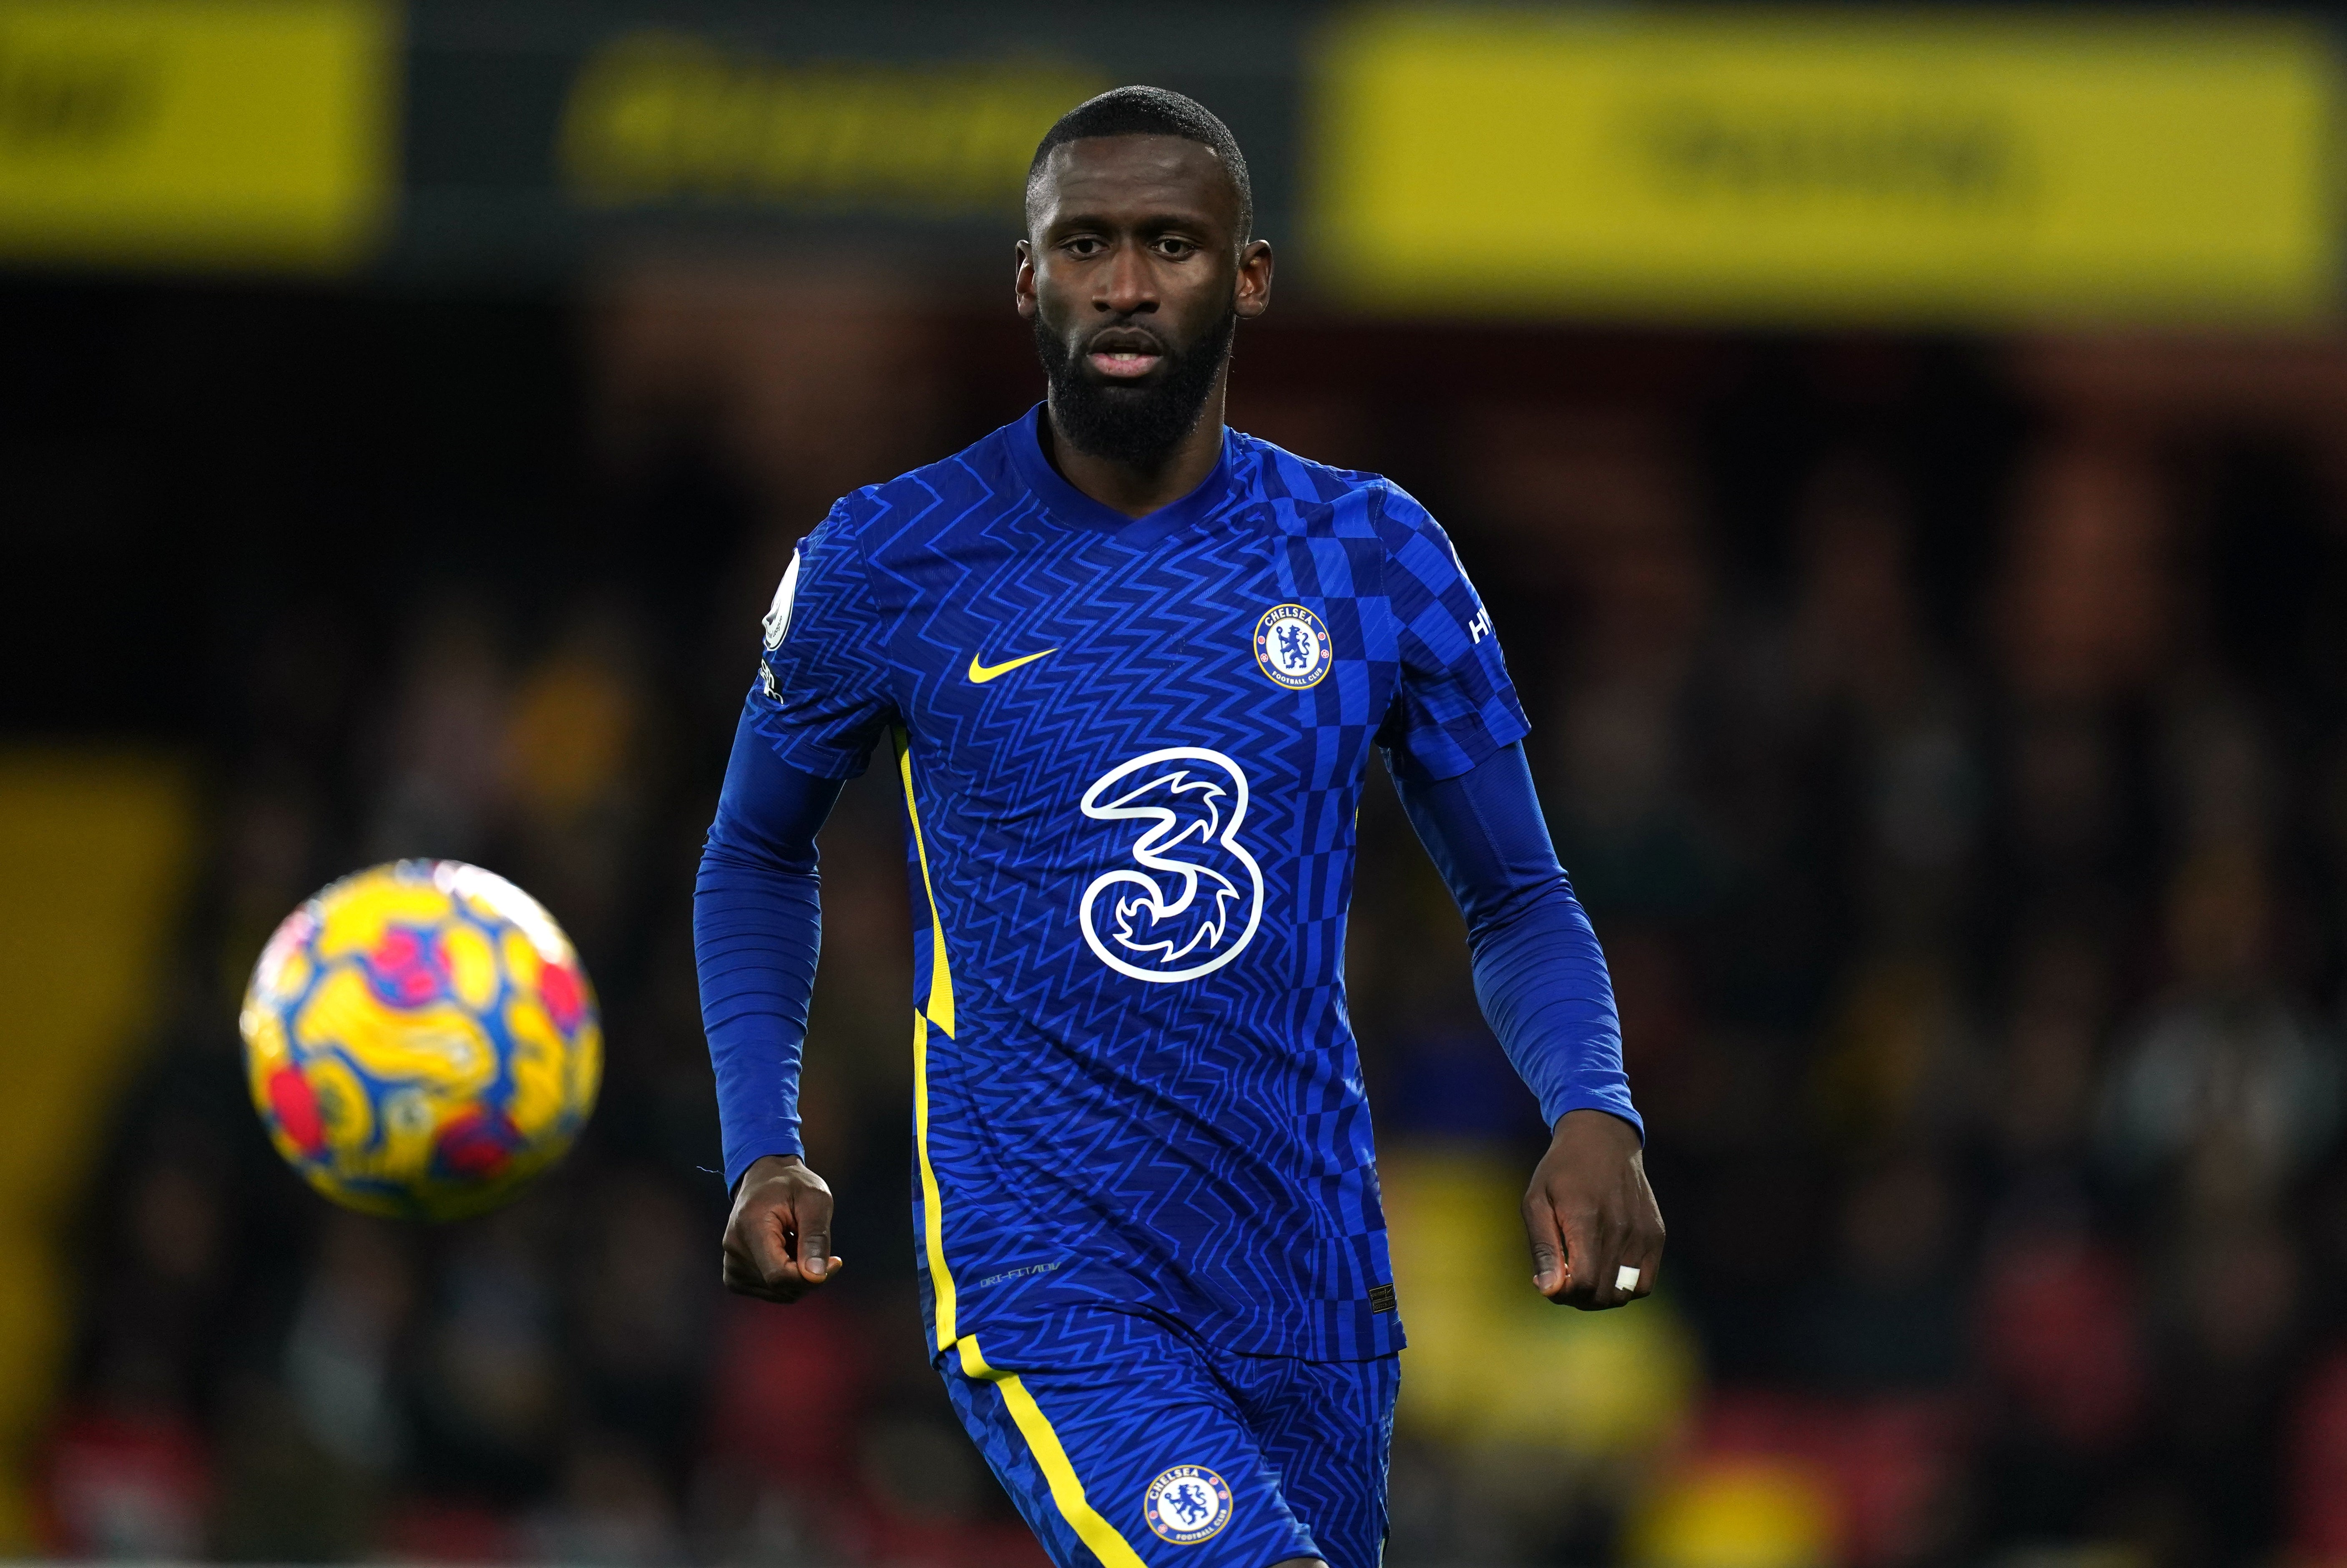 Antonio Rudiger remains in an uncertain situation with his Chelsea contract expiring next summer (Mike Egerton/PA)